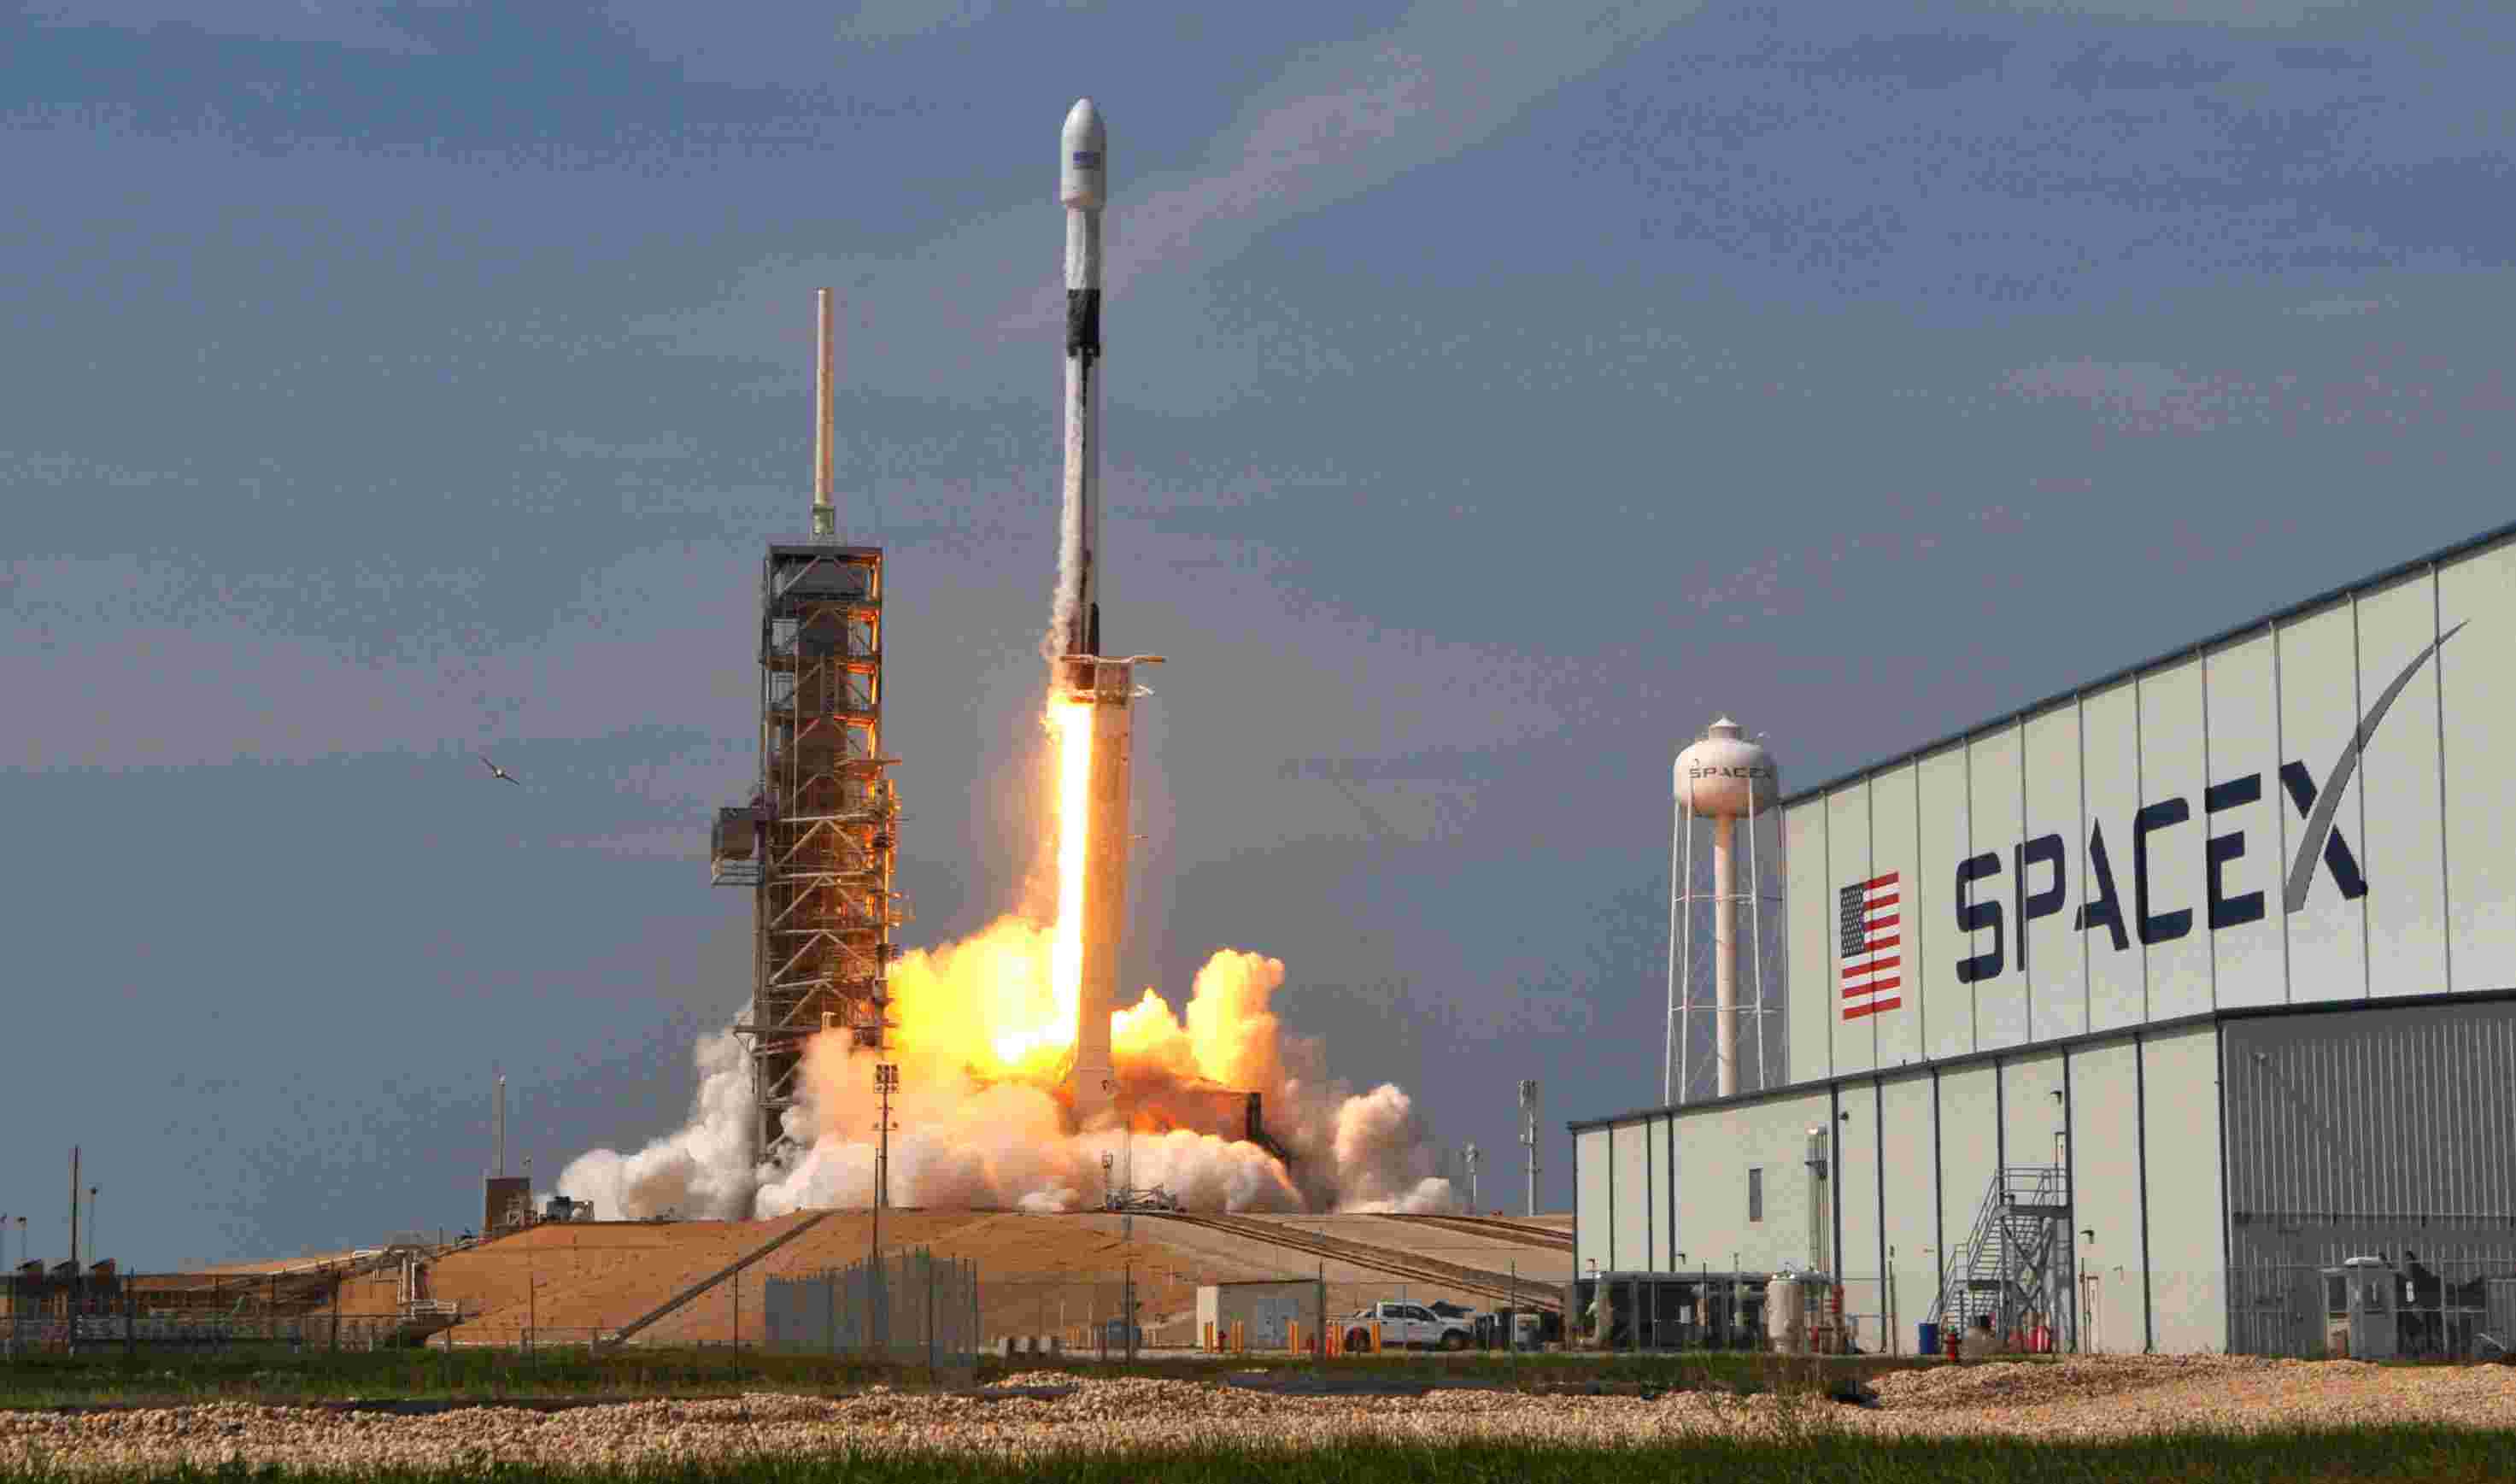 SpaceX targeting next week for Falcon 9 launch from Cape Canaveral